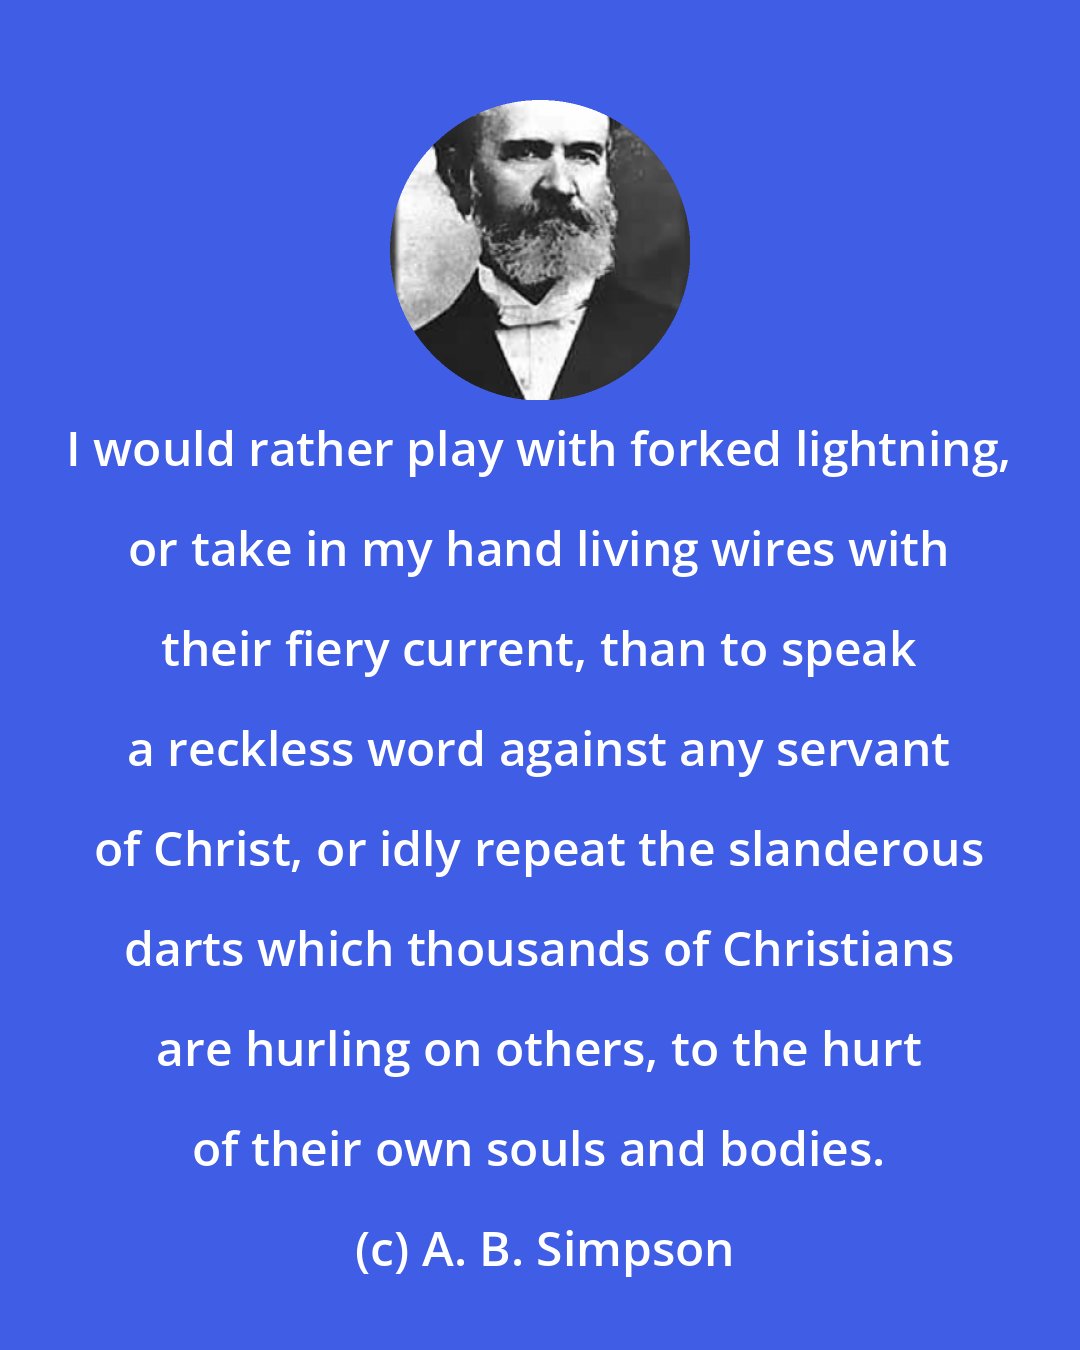 A. B. Simpson: I would rather play with forked lightning, or take in my hand living wires with their fiery current, than to speak a reckless word against any servant of Christ, or idly repeat the slanderous darts which thousands of Christians are hurling on others, to the hurt of their own souls and bodies.